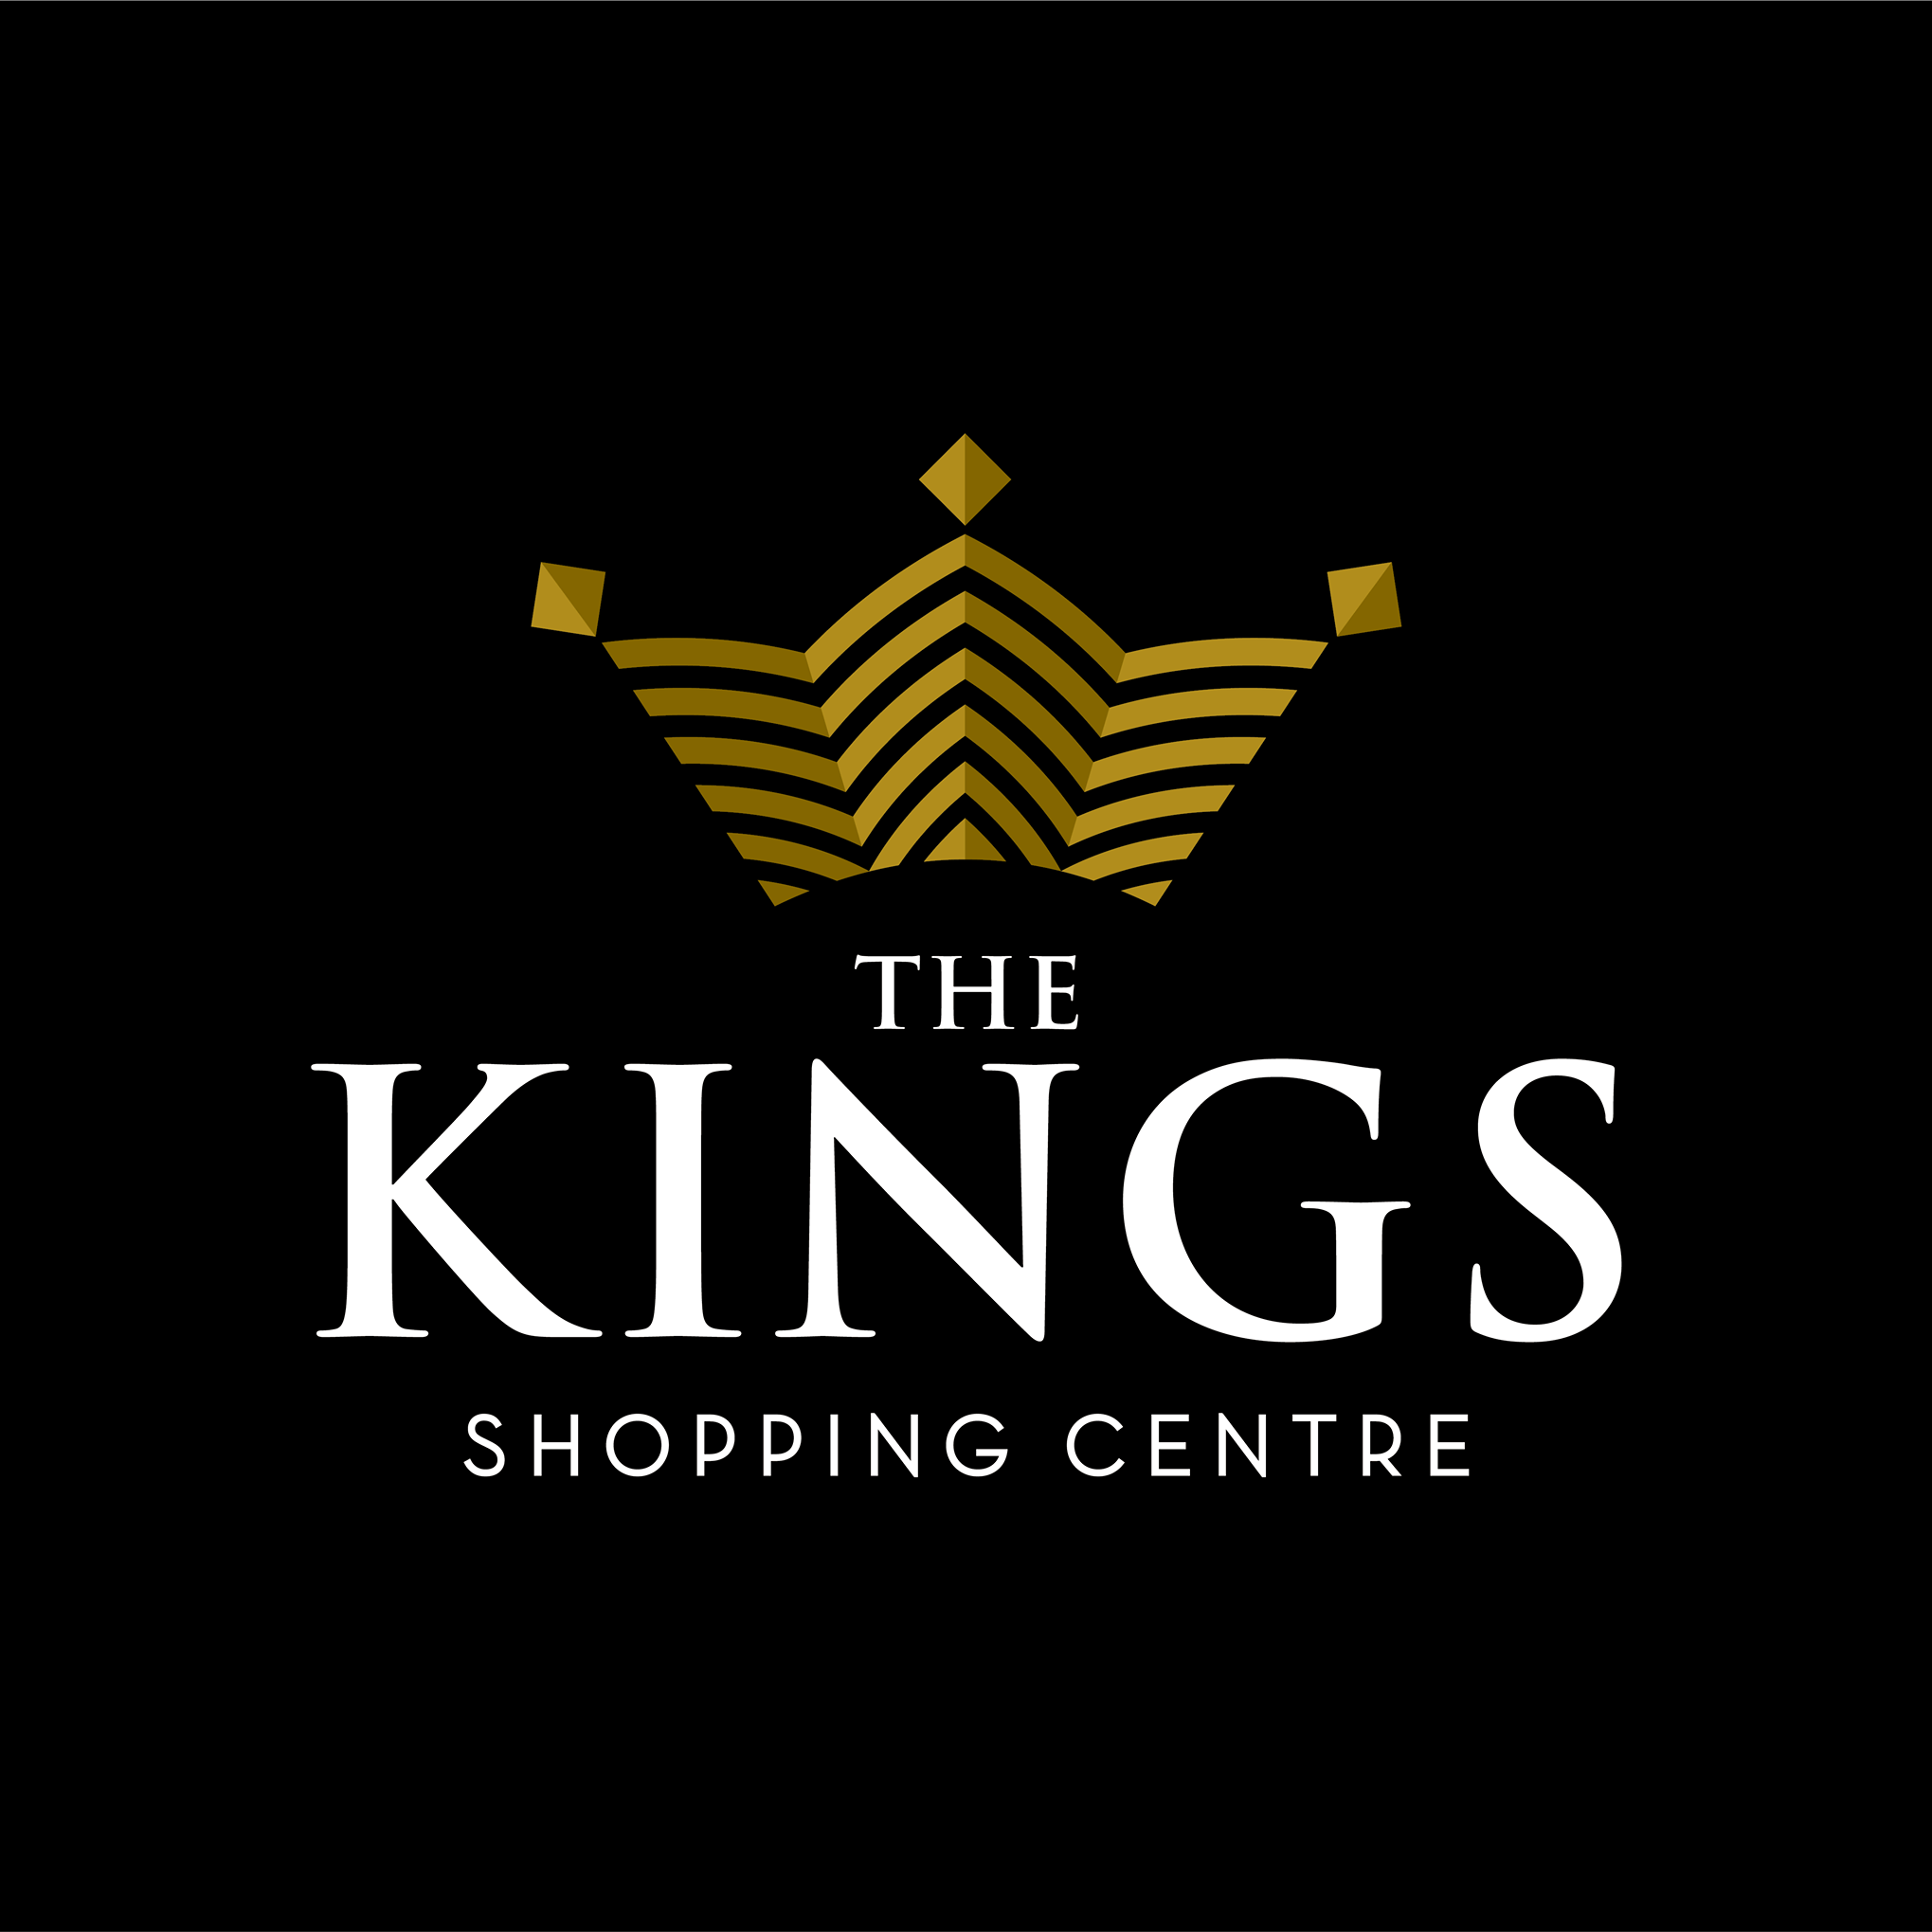 The Kings Shopping Centre